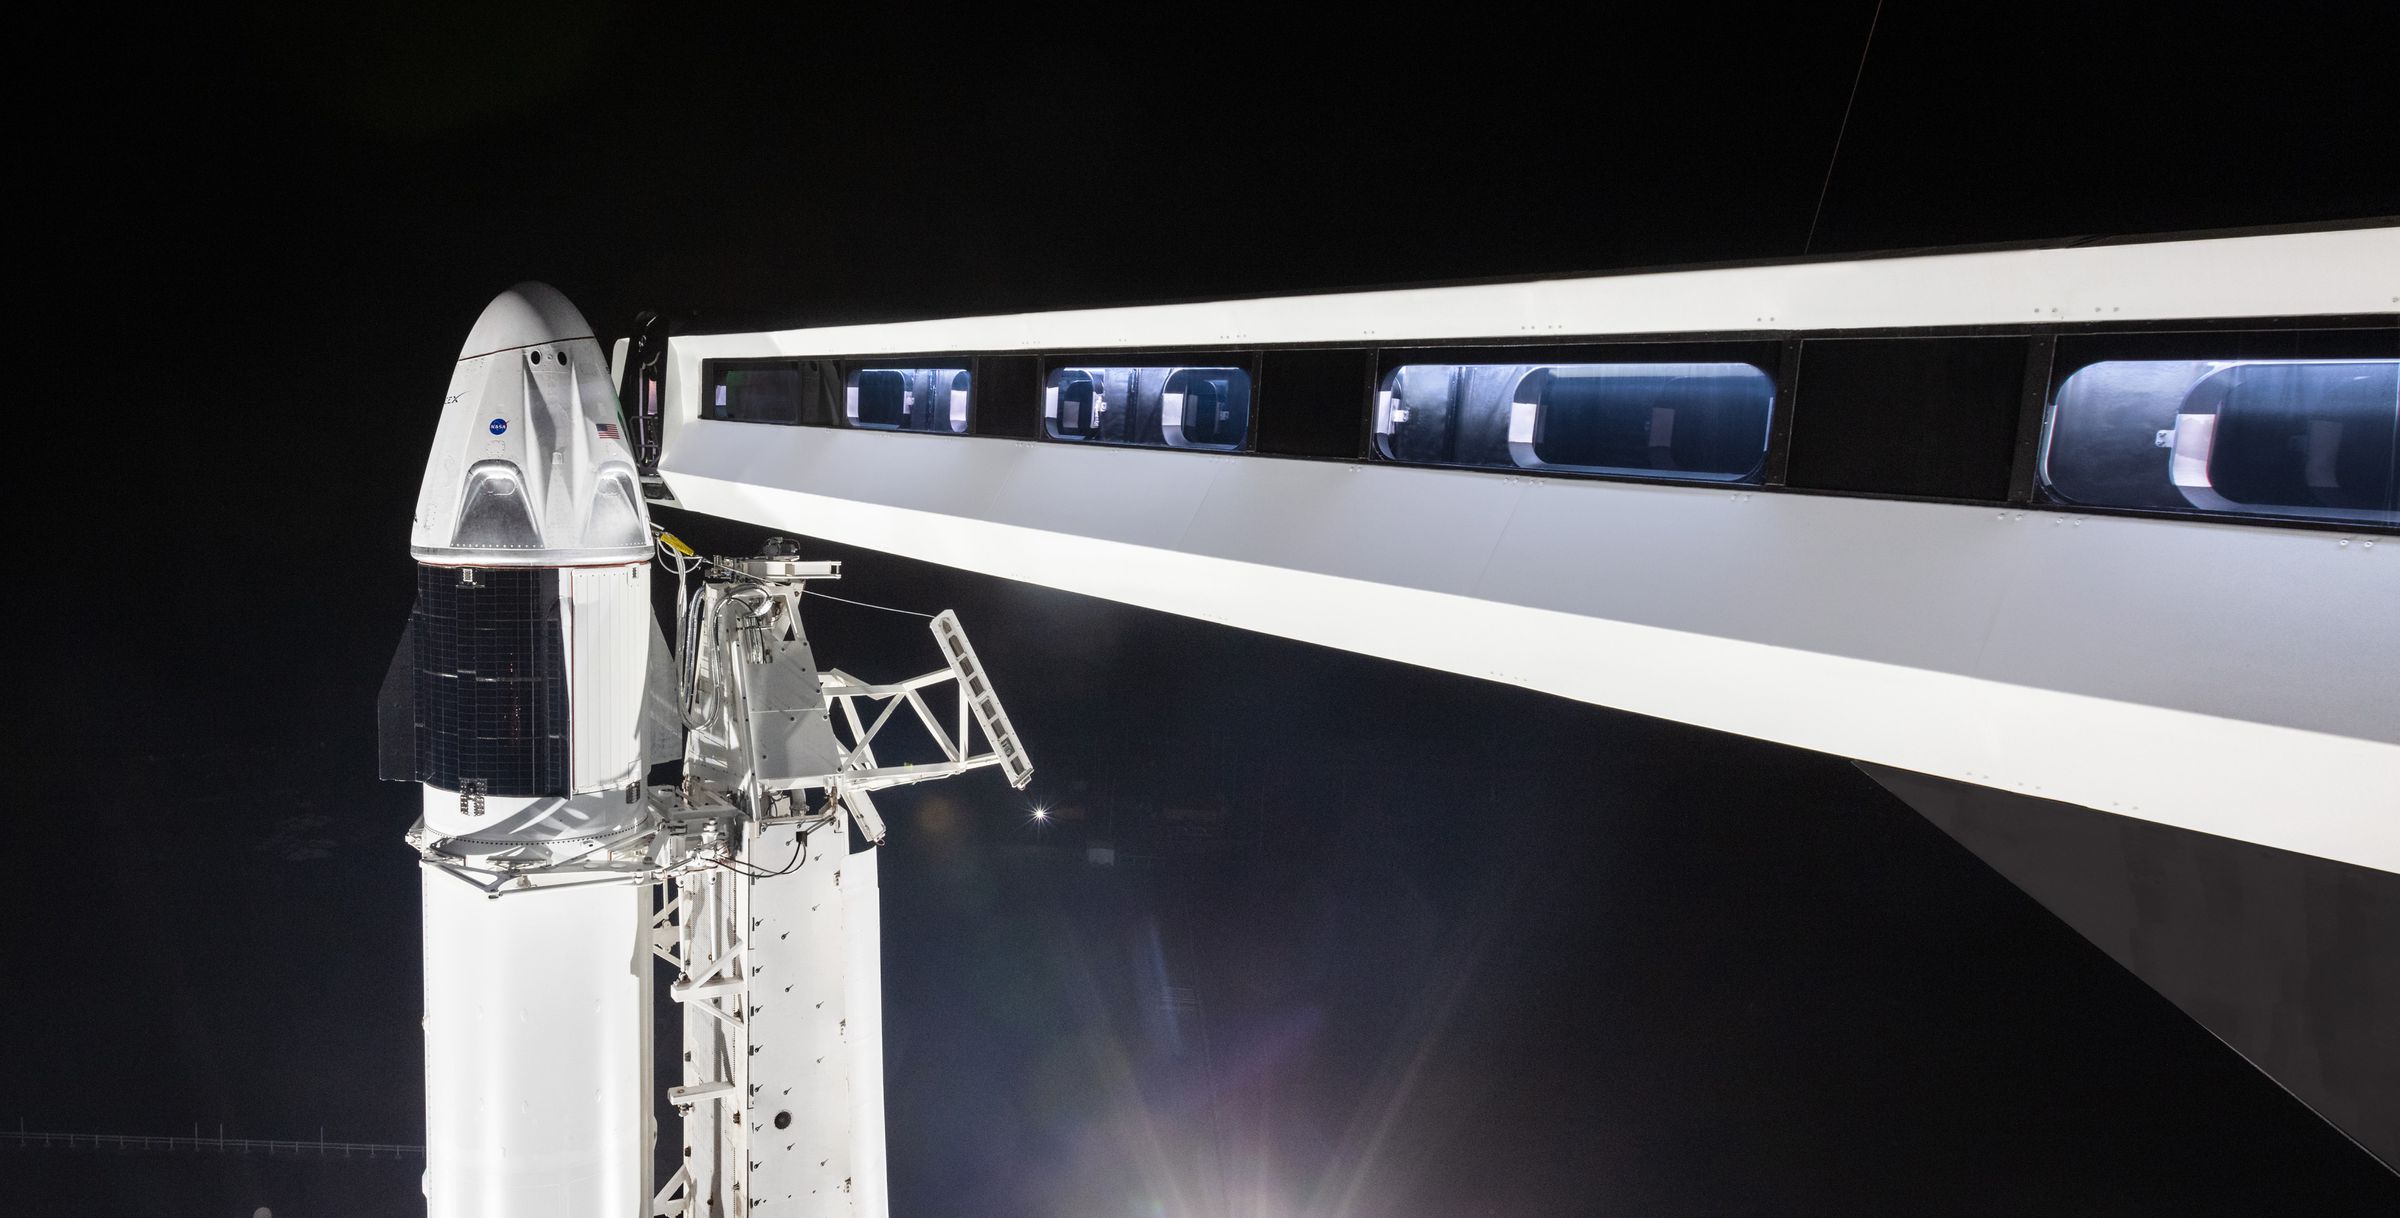 SpaceX’s Crew Dragon on top of the Falcon 9 that will carry it to space. SpaceX’s “crew access arm” is extended toward the capsule.